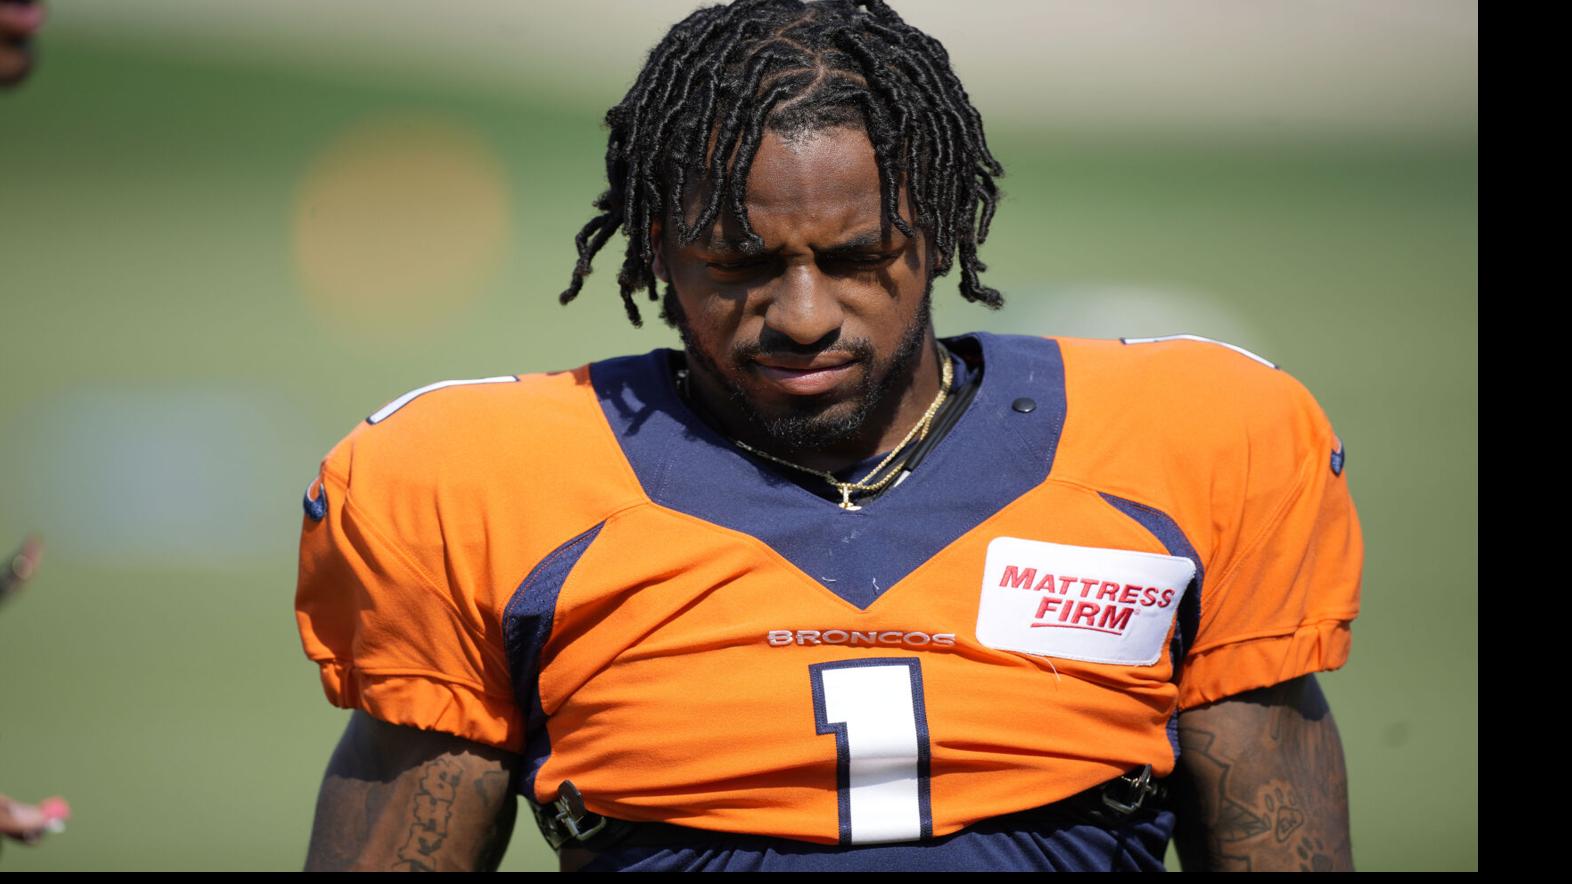 KJ Hamler becomes advocate for player mental health after sharing raw story  at Broncos camp - The Athletic